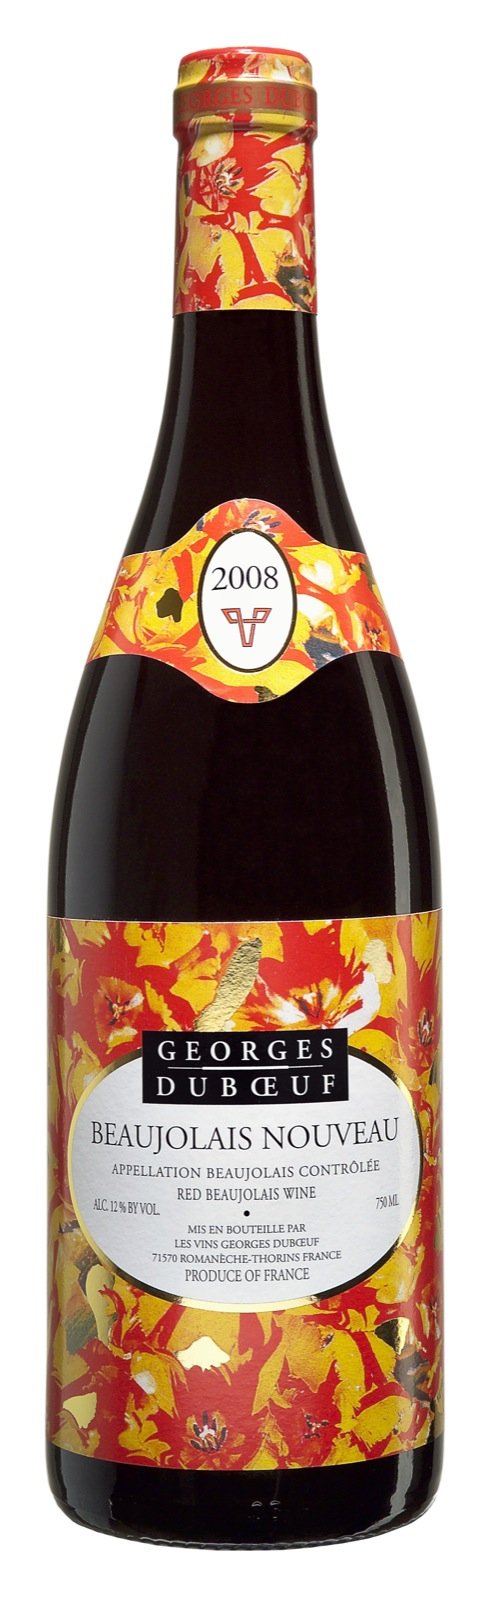 The 2008 Beaujolais Nouveau will be released on Thursday, Nov. 20, at 12:01 a.m.